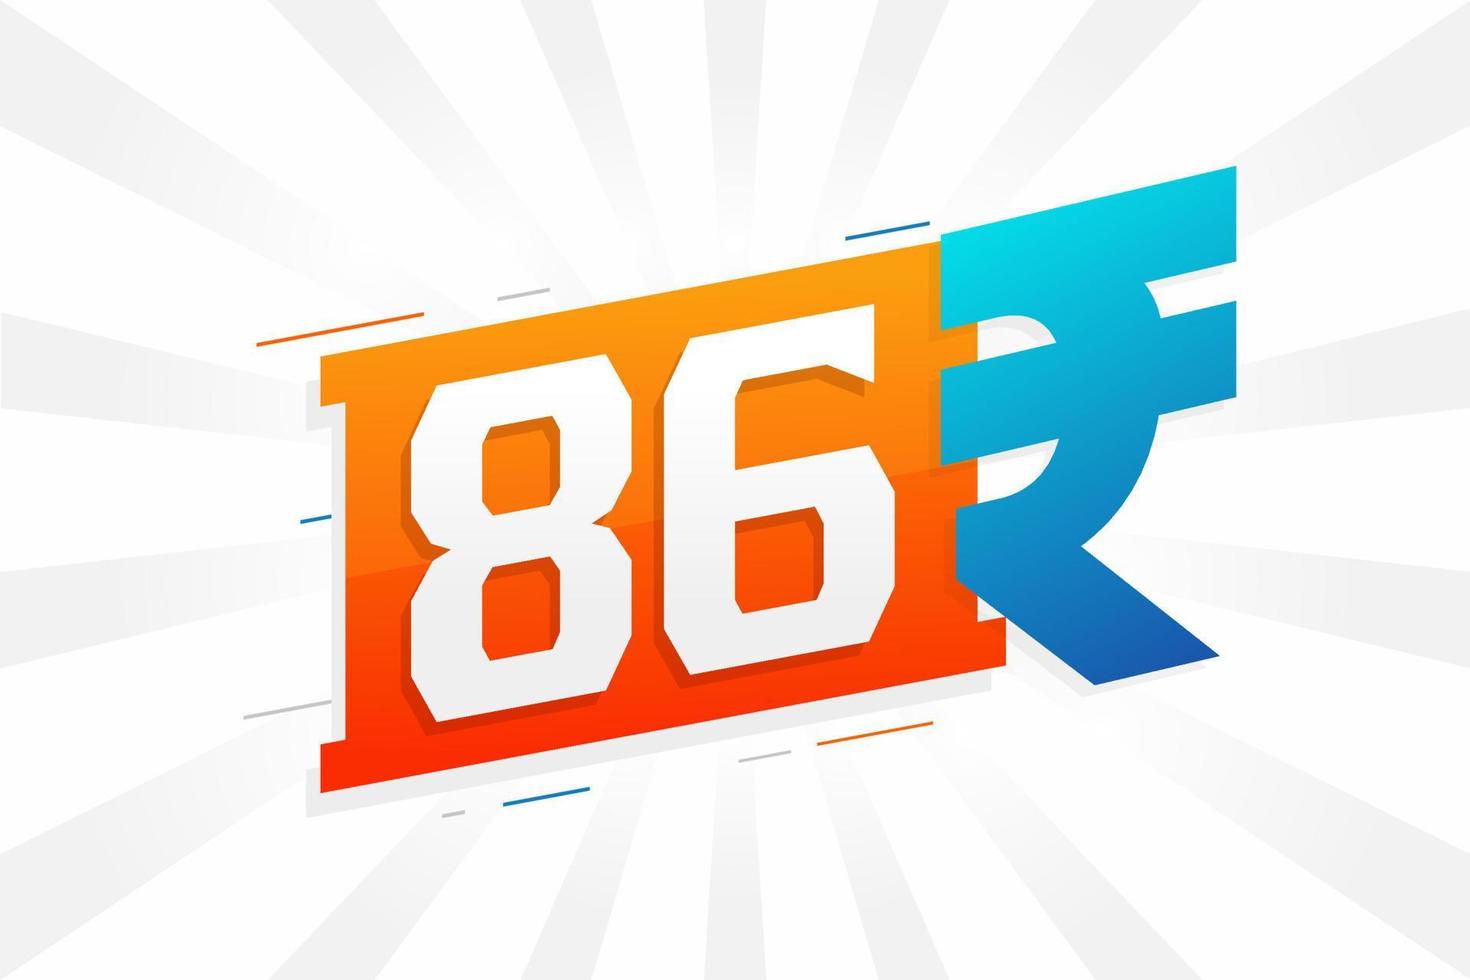 86 Rupee symbol bold text vector image. 86 Indian Rupee currency sign vector illustration